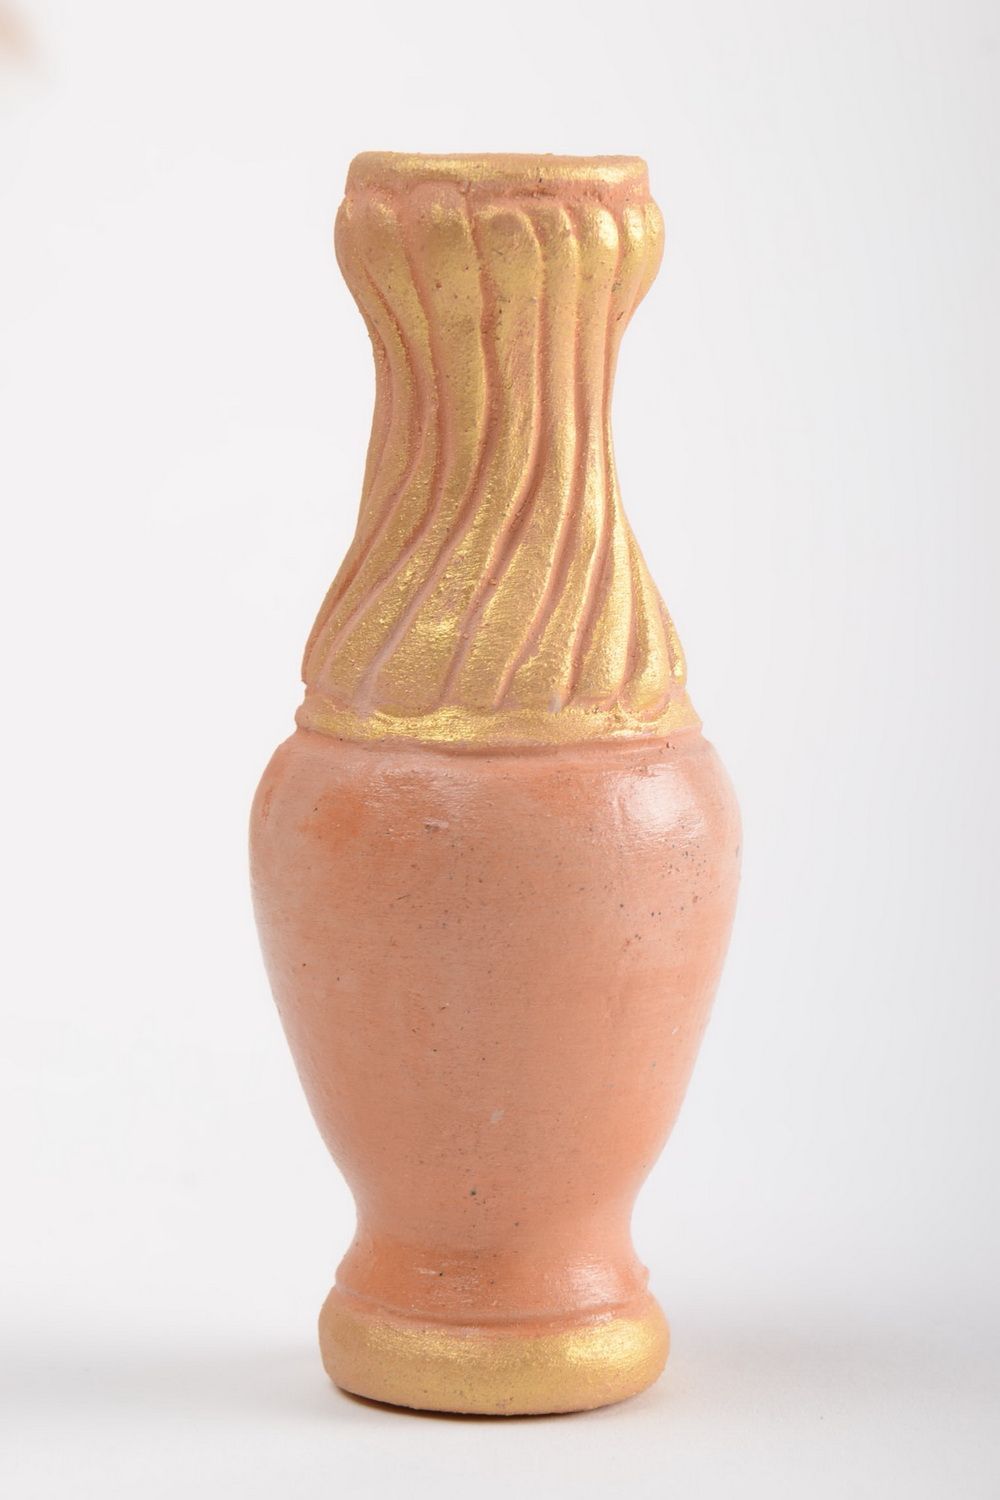 Clay beige vase 4 inches for table or shelf décor 3 oz, 0,19 lb photo 2